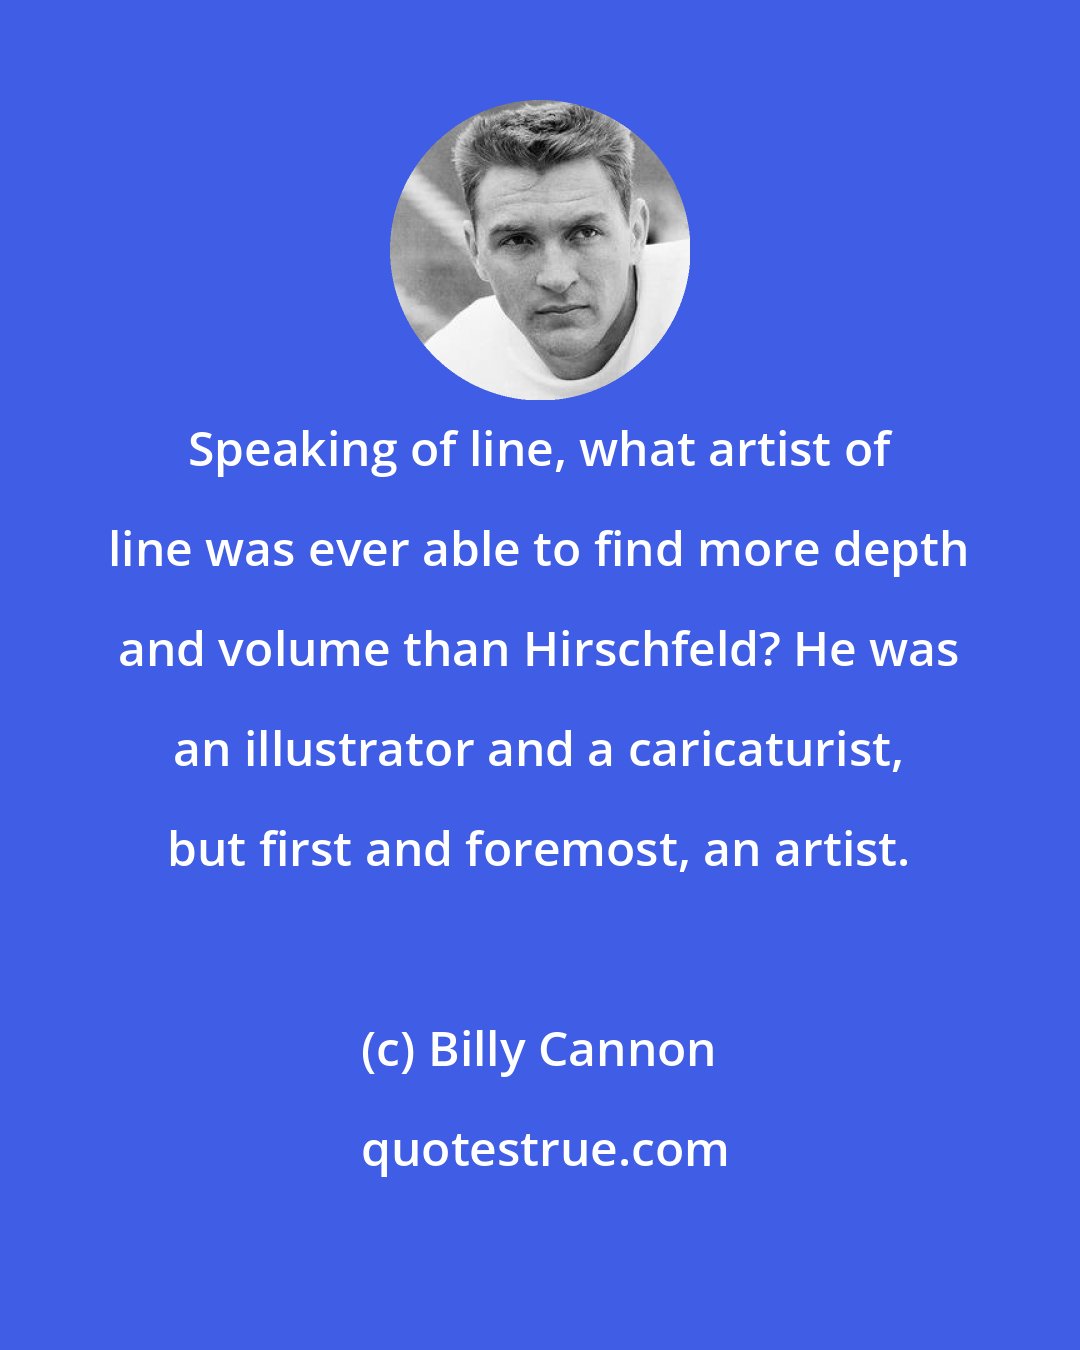 Billy Cannon: Speaking of line, what artist of line was ever able to find more depth and volume than Hirschfeld? He was an illustrator and a caricaturist, but first and foremost, an artist.